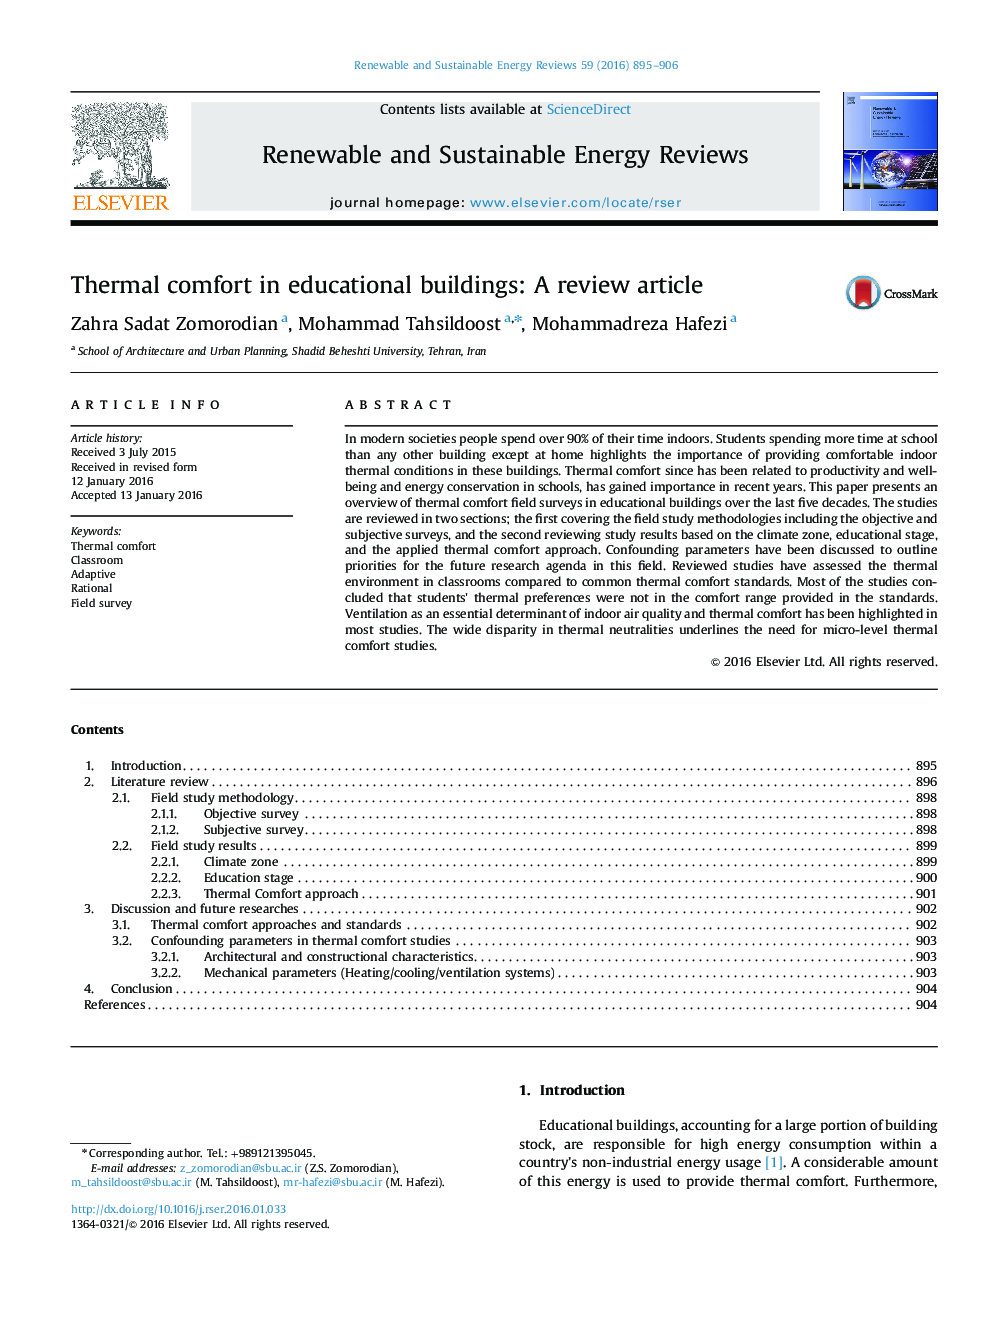 Thermal comfort in educational buildings: A review article